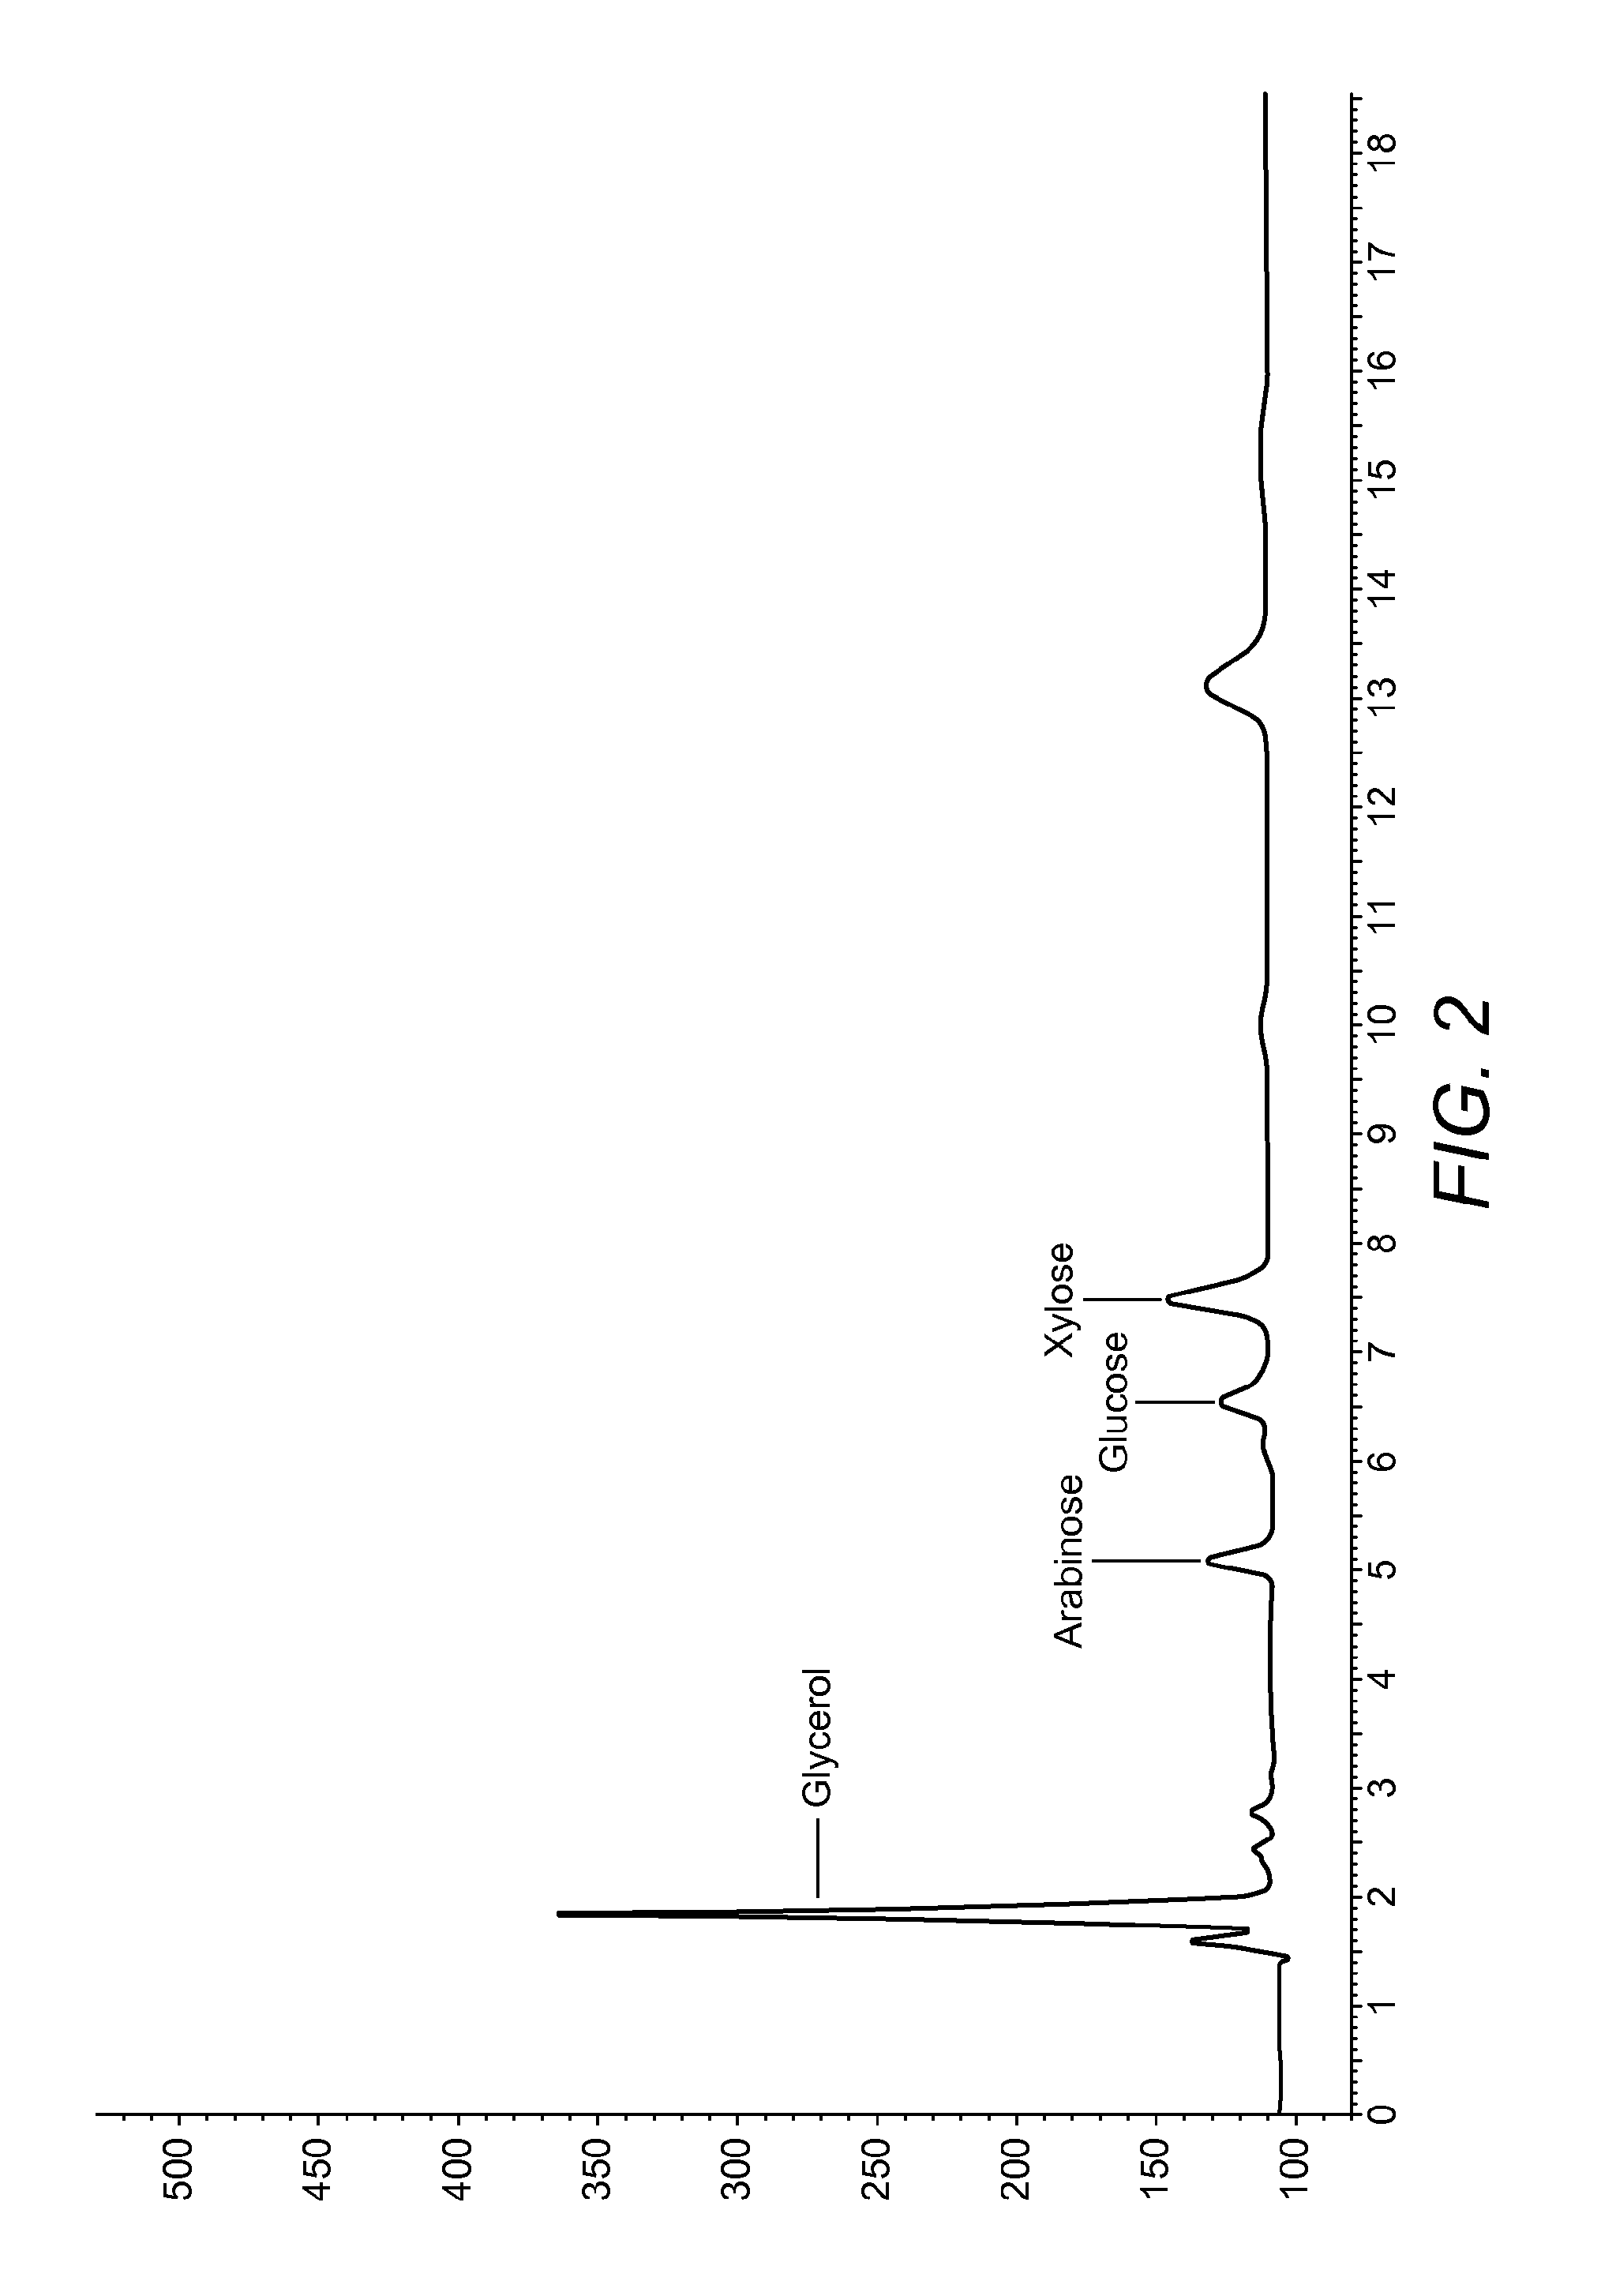 Hydrolysis and Fermentation Process for Animal Feed Production